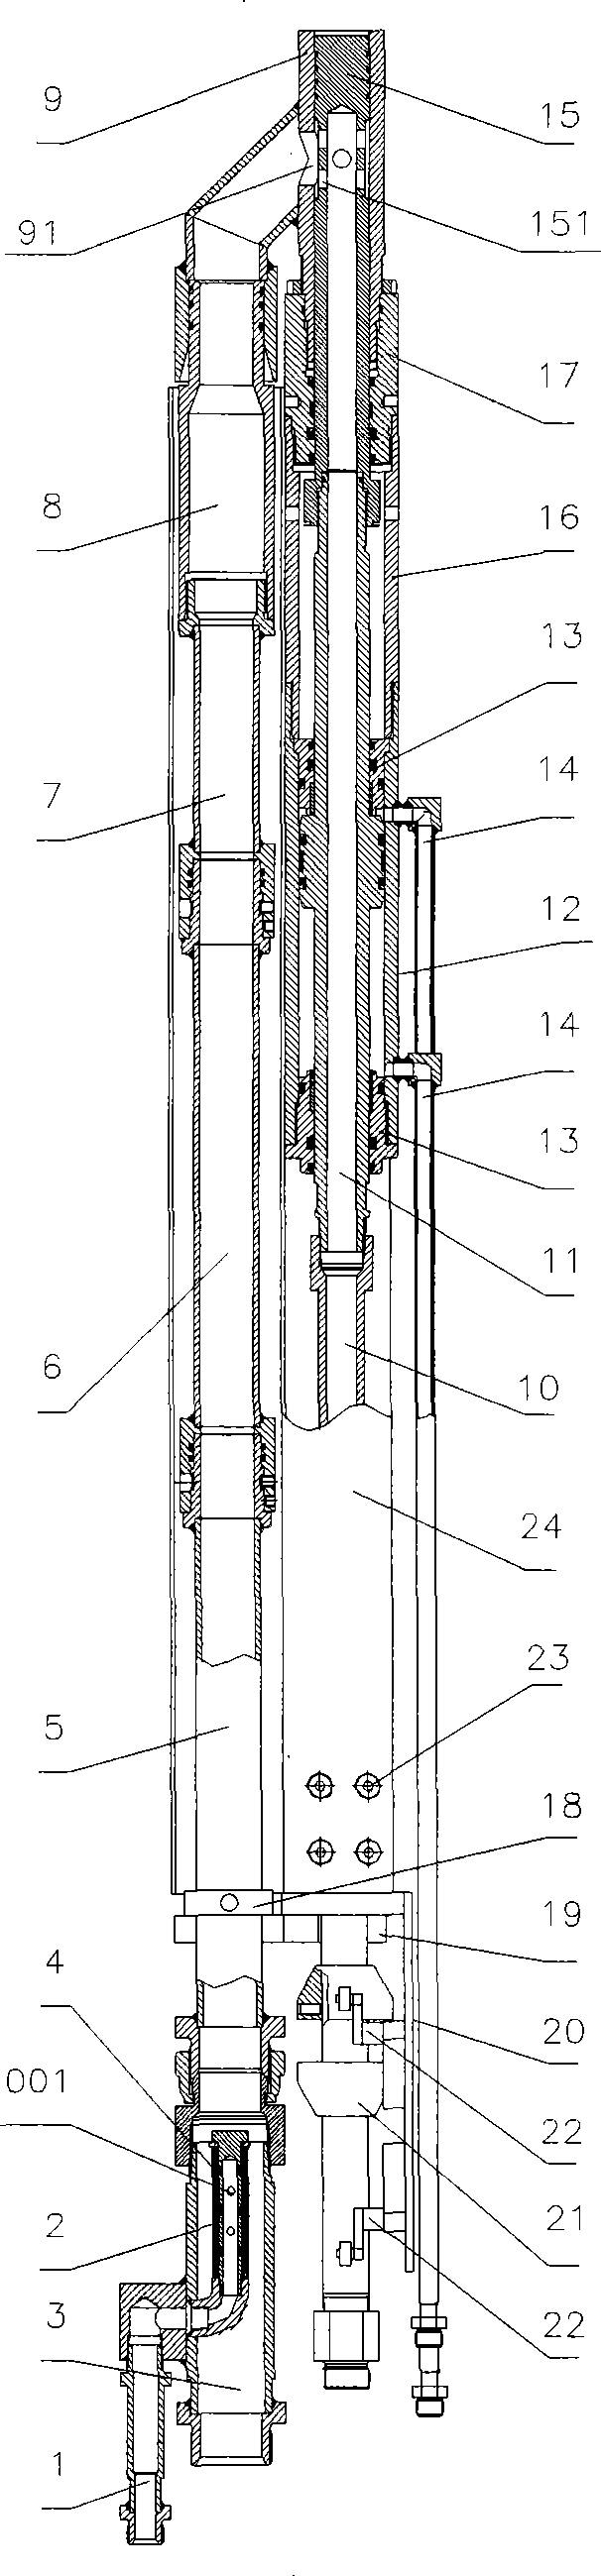 Dual-fluid synchronous slip casting and cleaning switching mechanism